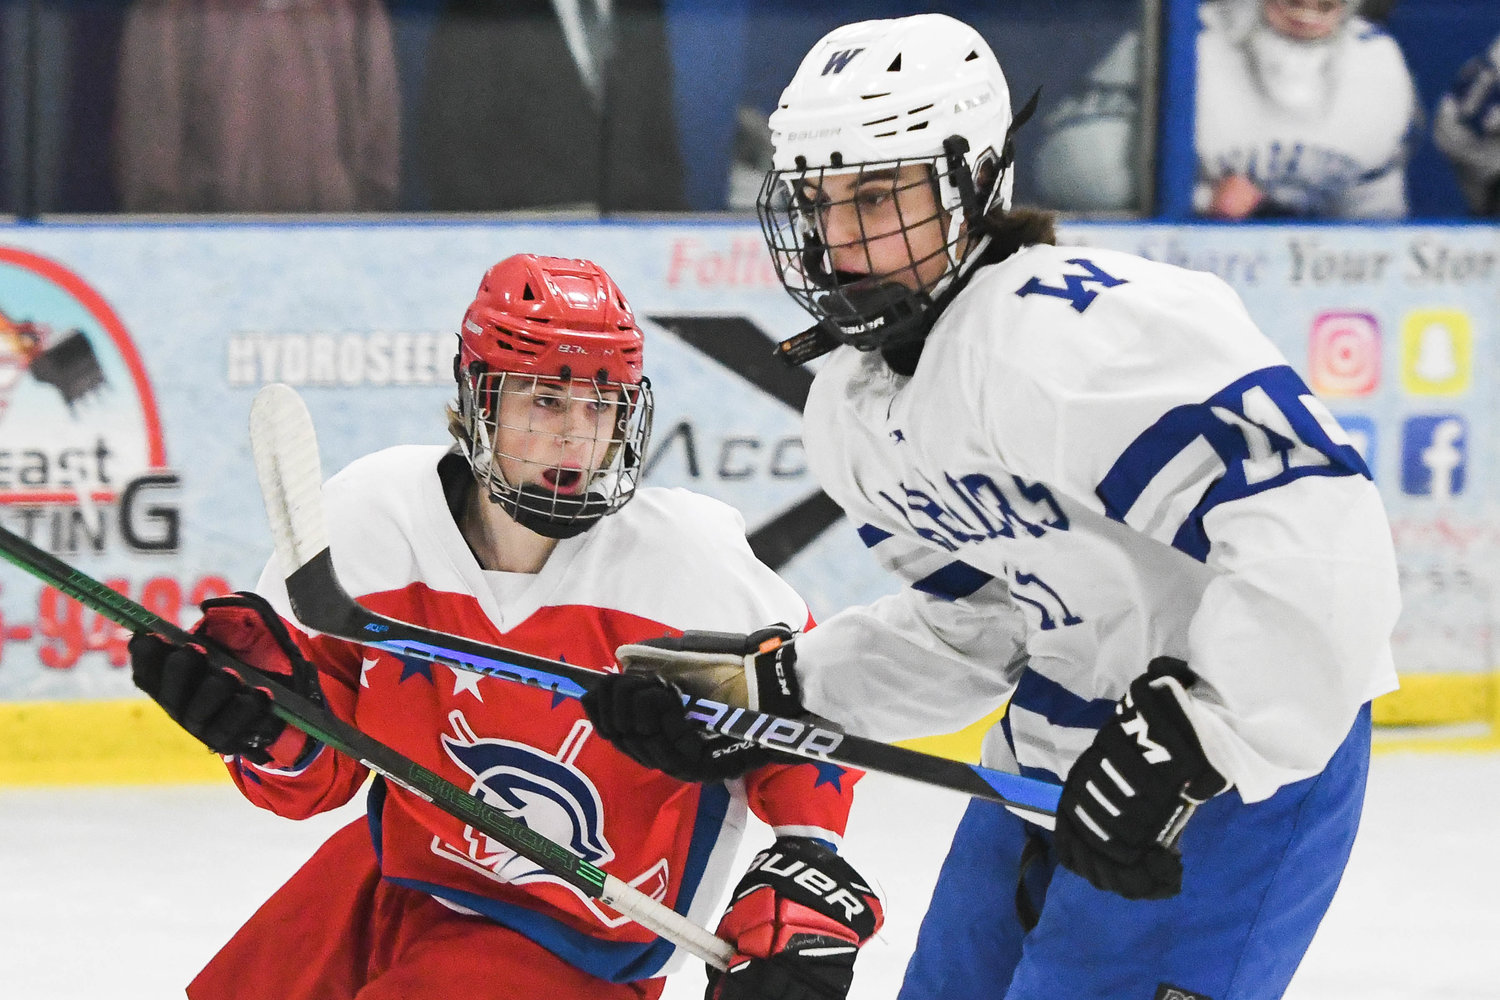 New Hartford’s Jake Hill, left, looks for a pass as Whitesboro’s Brett Purner defends in front of the net on Tuesday at the Whitestown Community Ice Rink. New Hartford got the game’s only goal for a 1-0 victory.